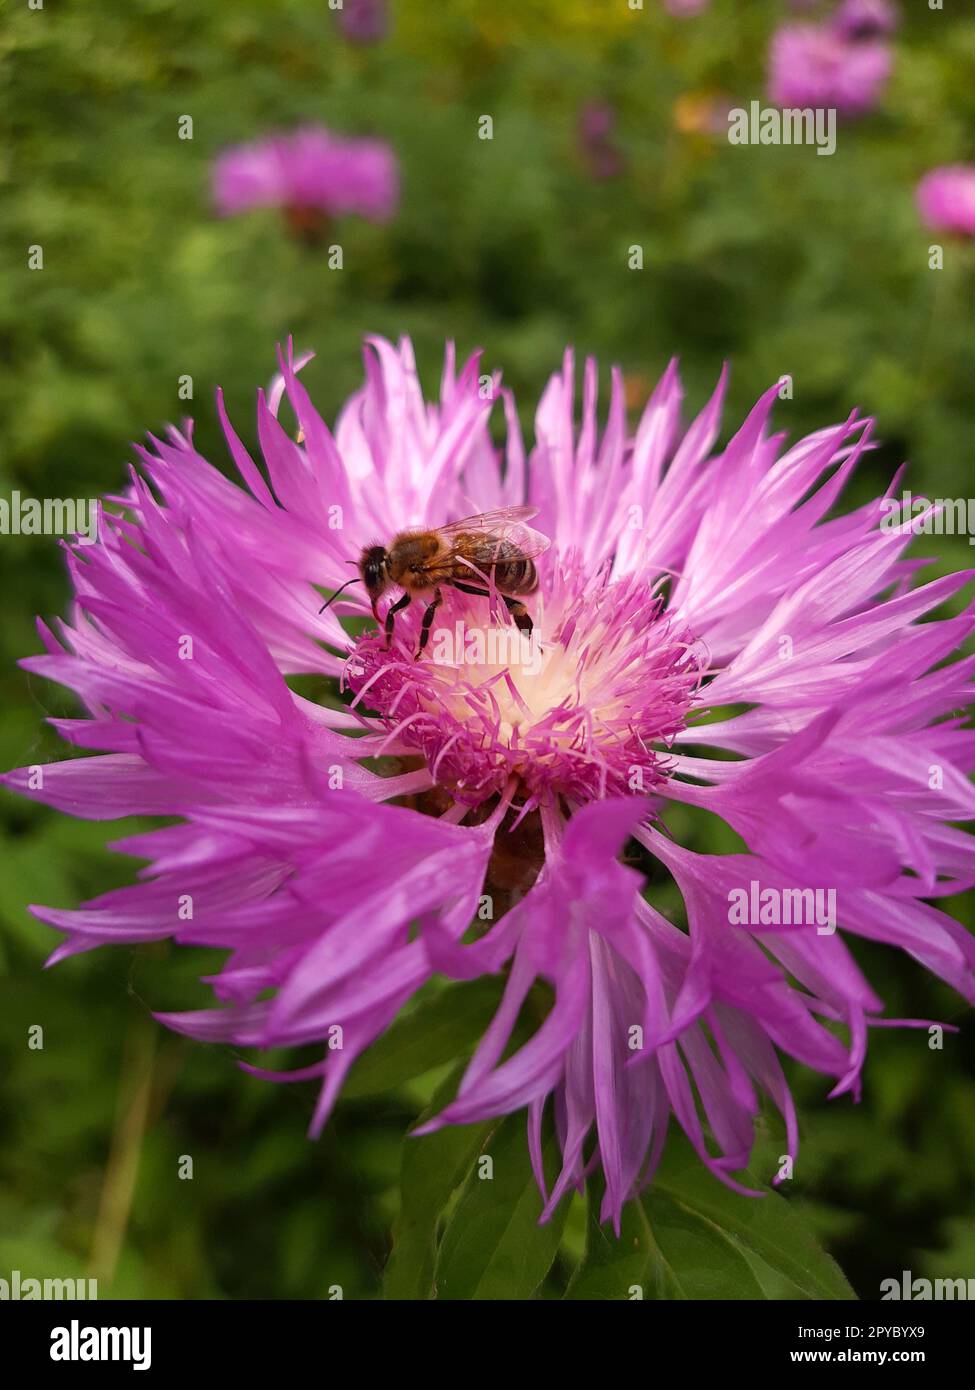 A bee on a cornflower flower close-up against a background of greenery Stock Photo